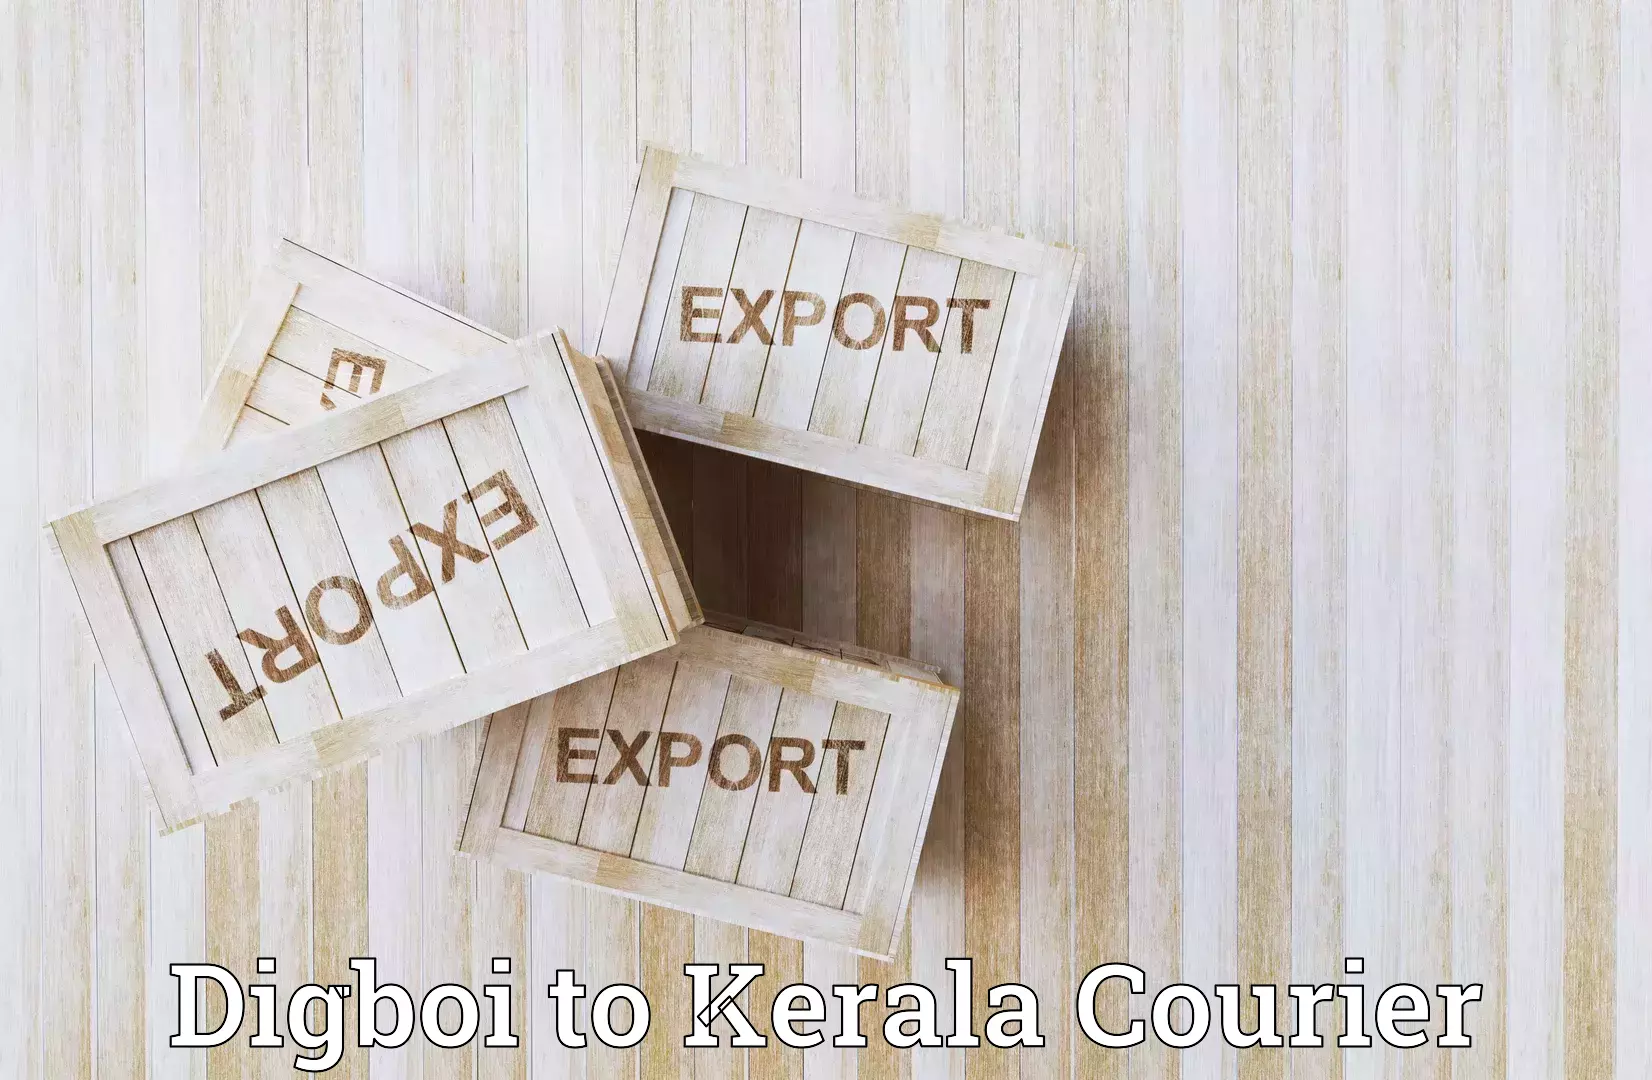 Advanced parcel tracking in Digboi to Kerala